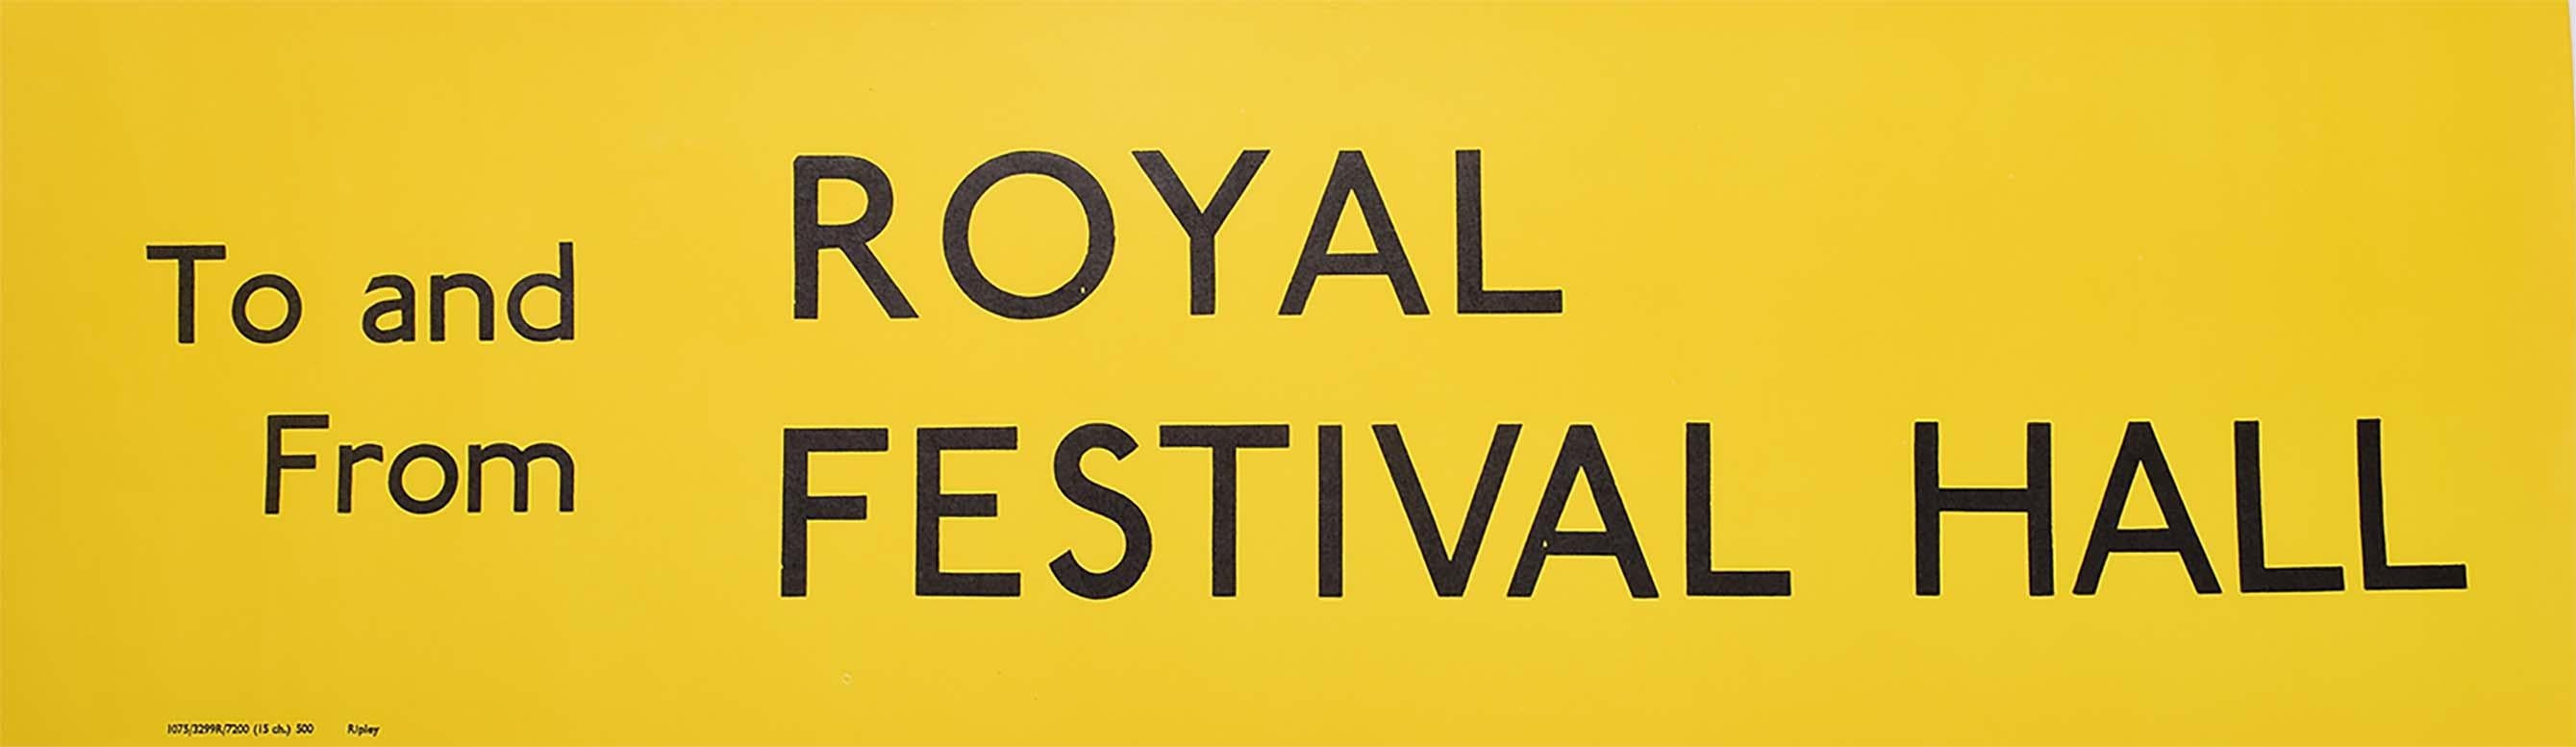 Unknown Print - Royal Festival Hall London England Routemaster Bus sign c. 1970